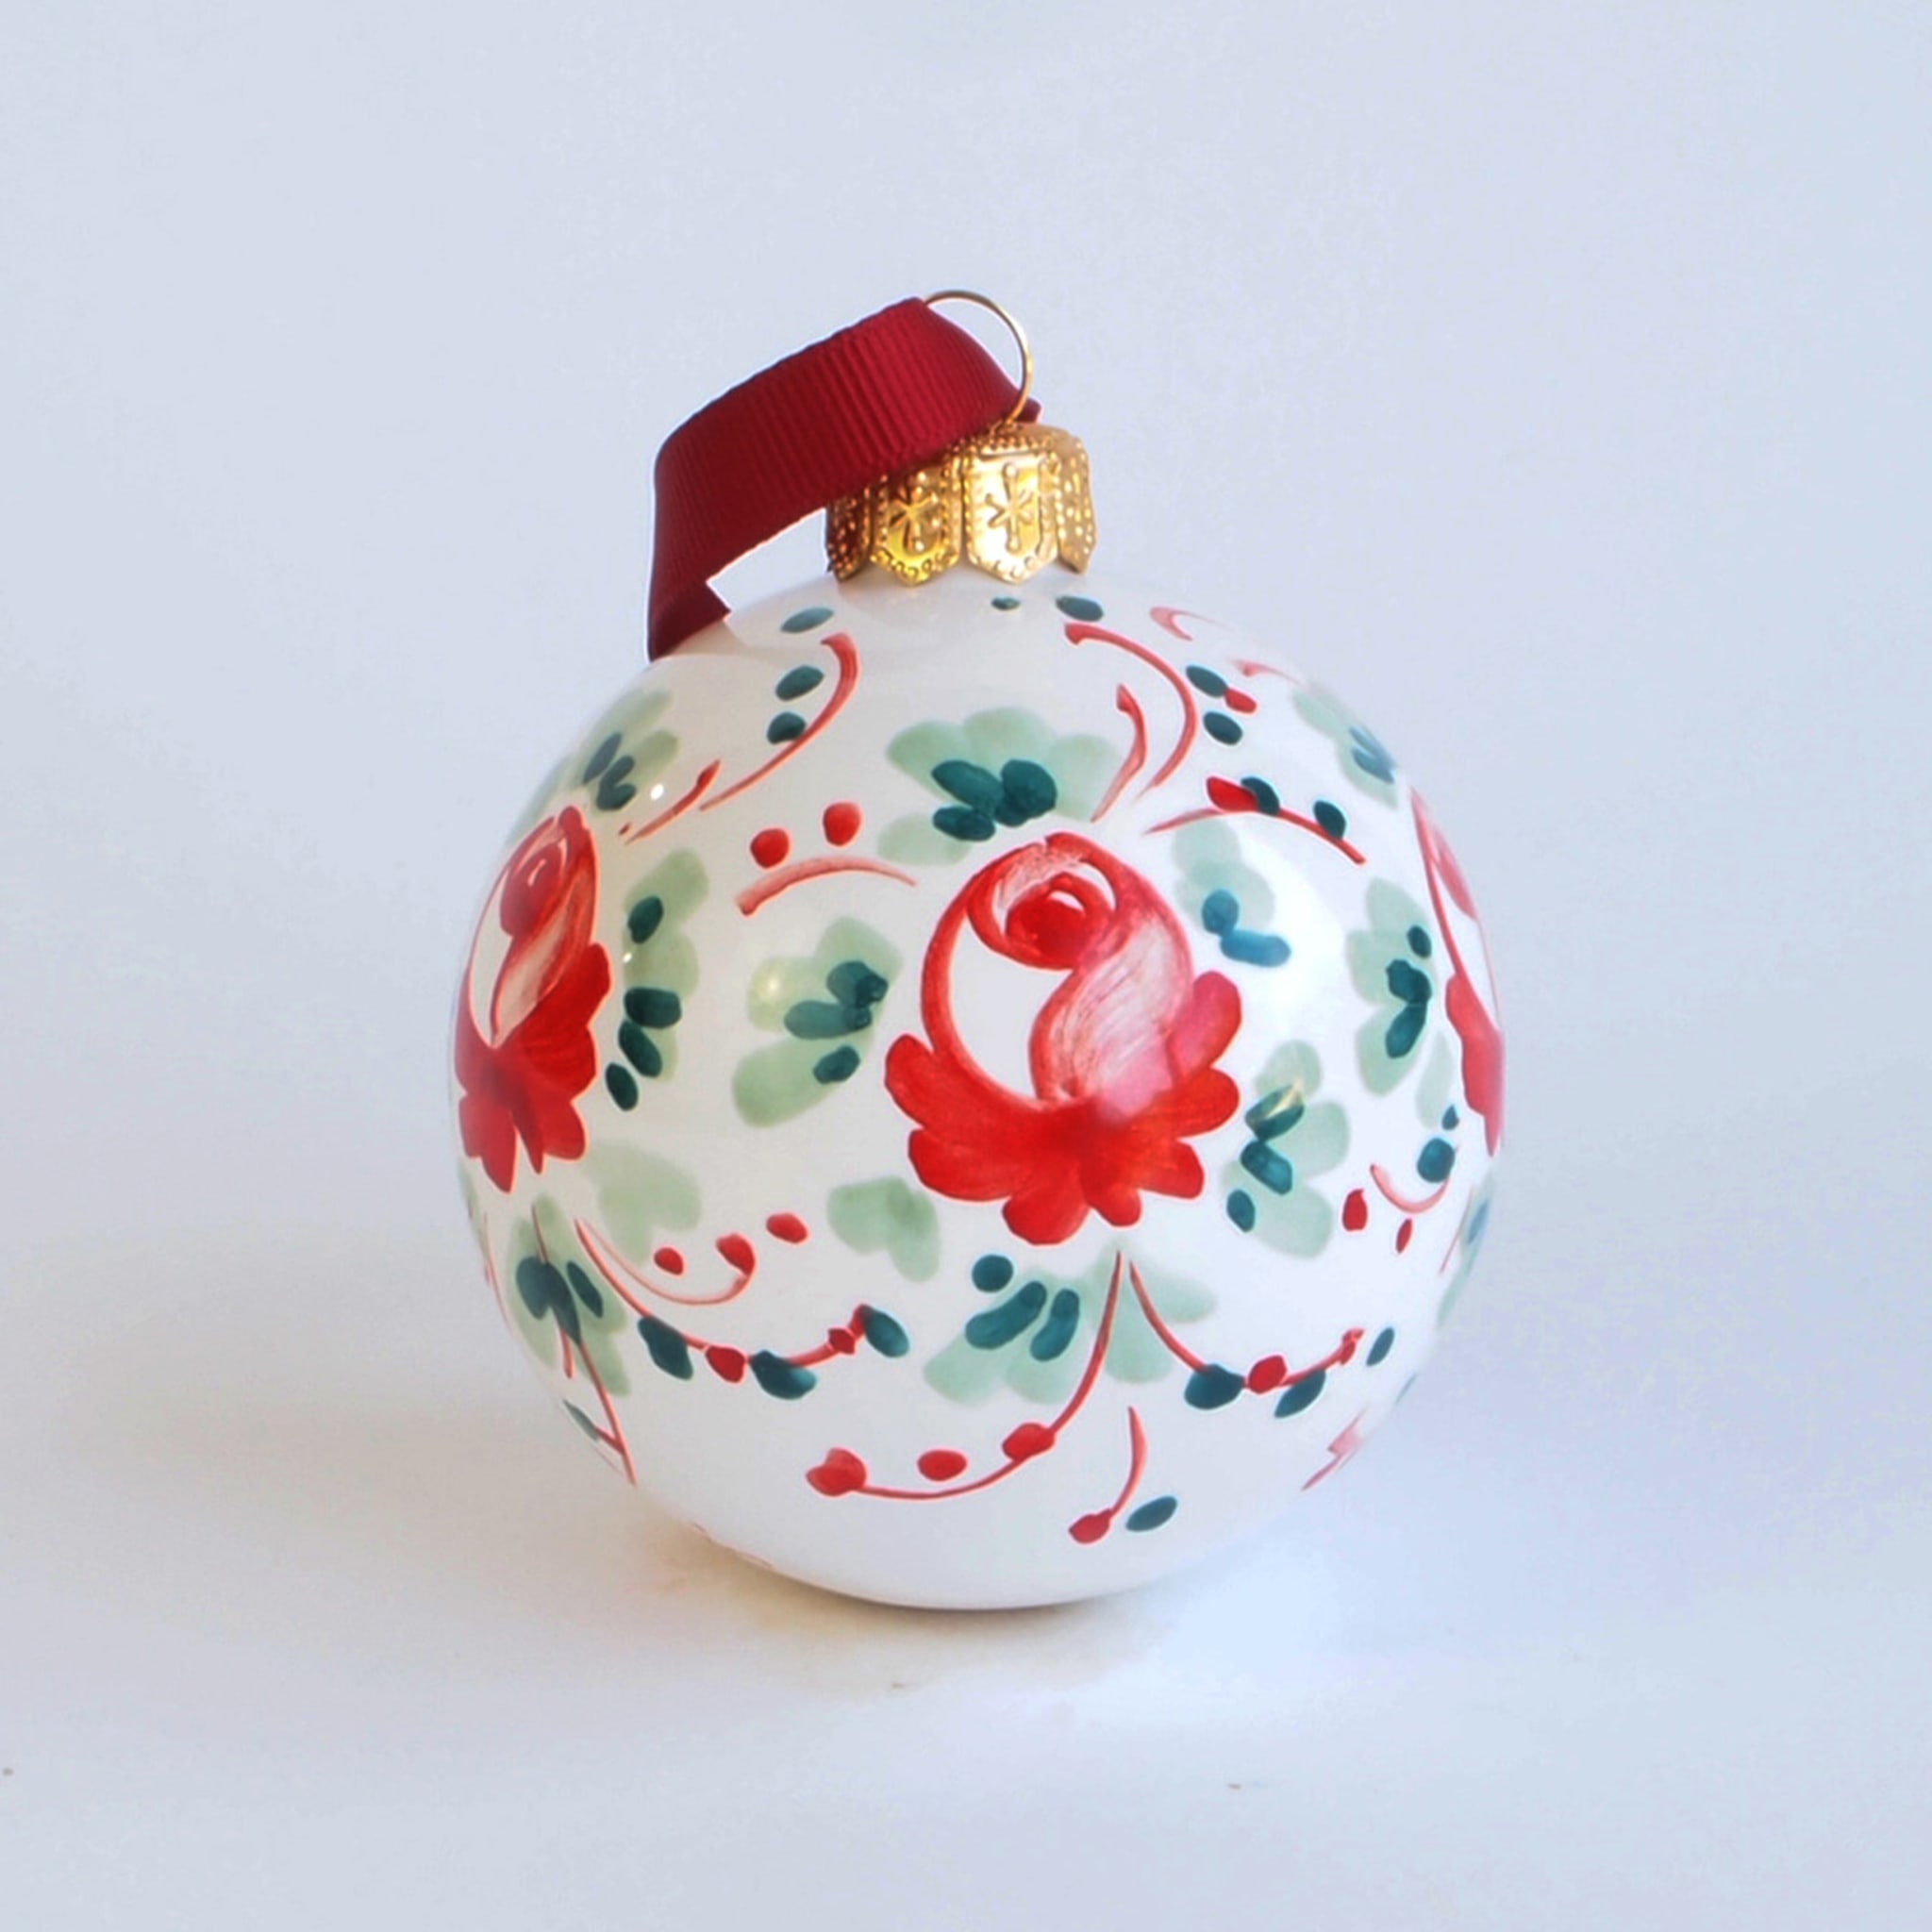 Multicolor Floral Christmas Ball Ornament #2 - Alternative view 1